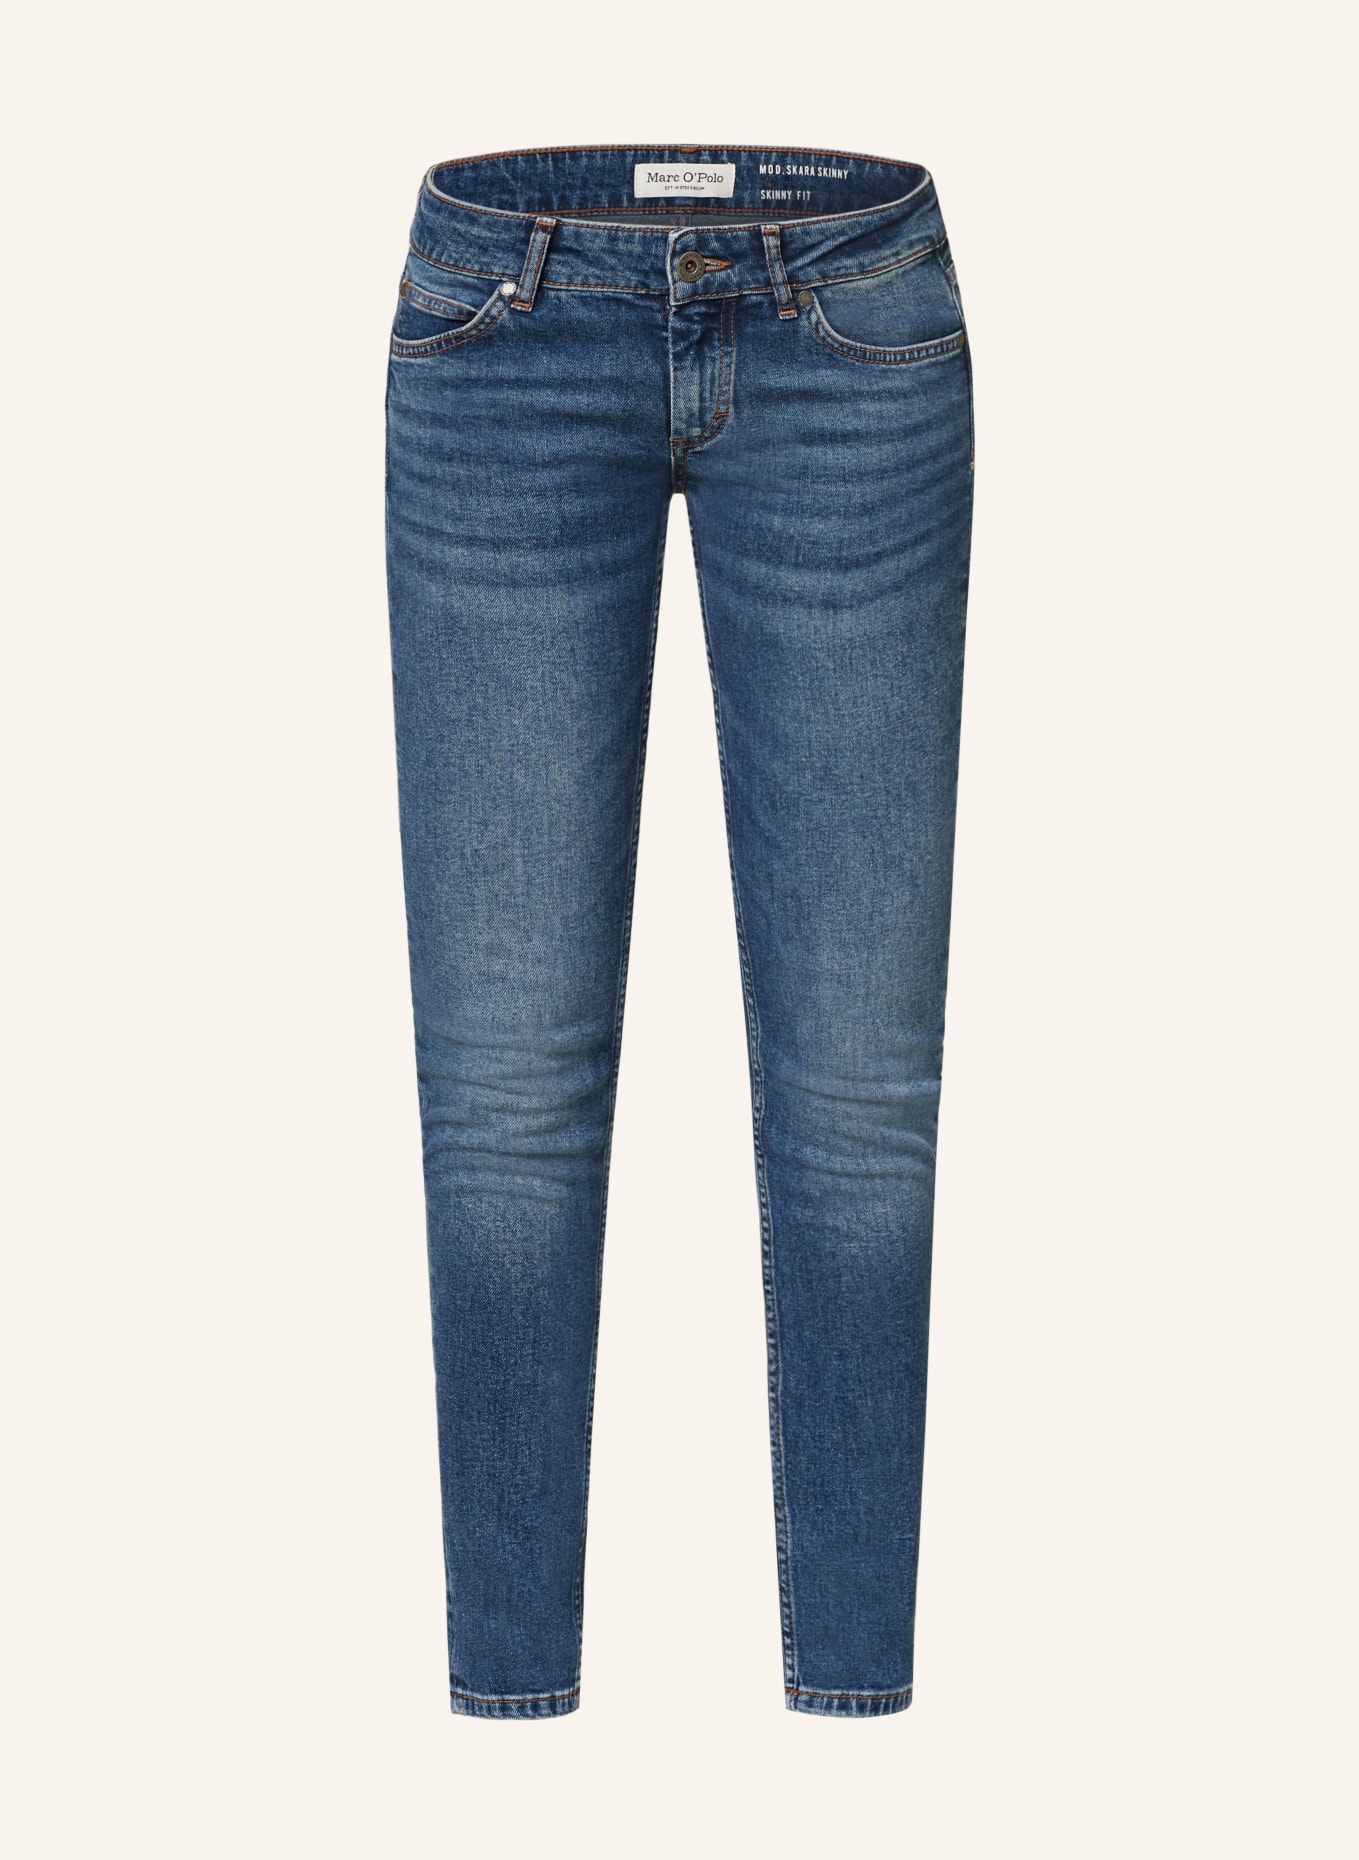 Marc O'Polo Skinny Jeans, Farbe: 004 sustainable dark blue salt and (Bild 1)